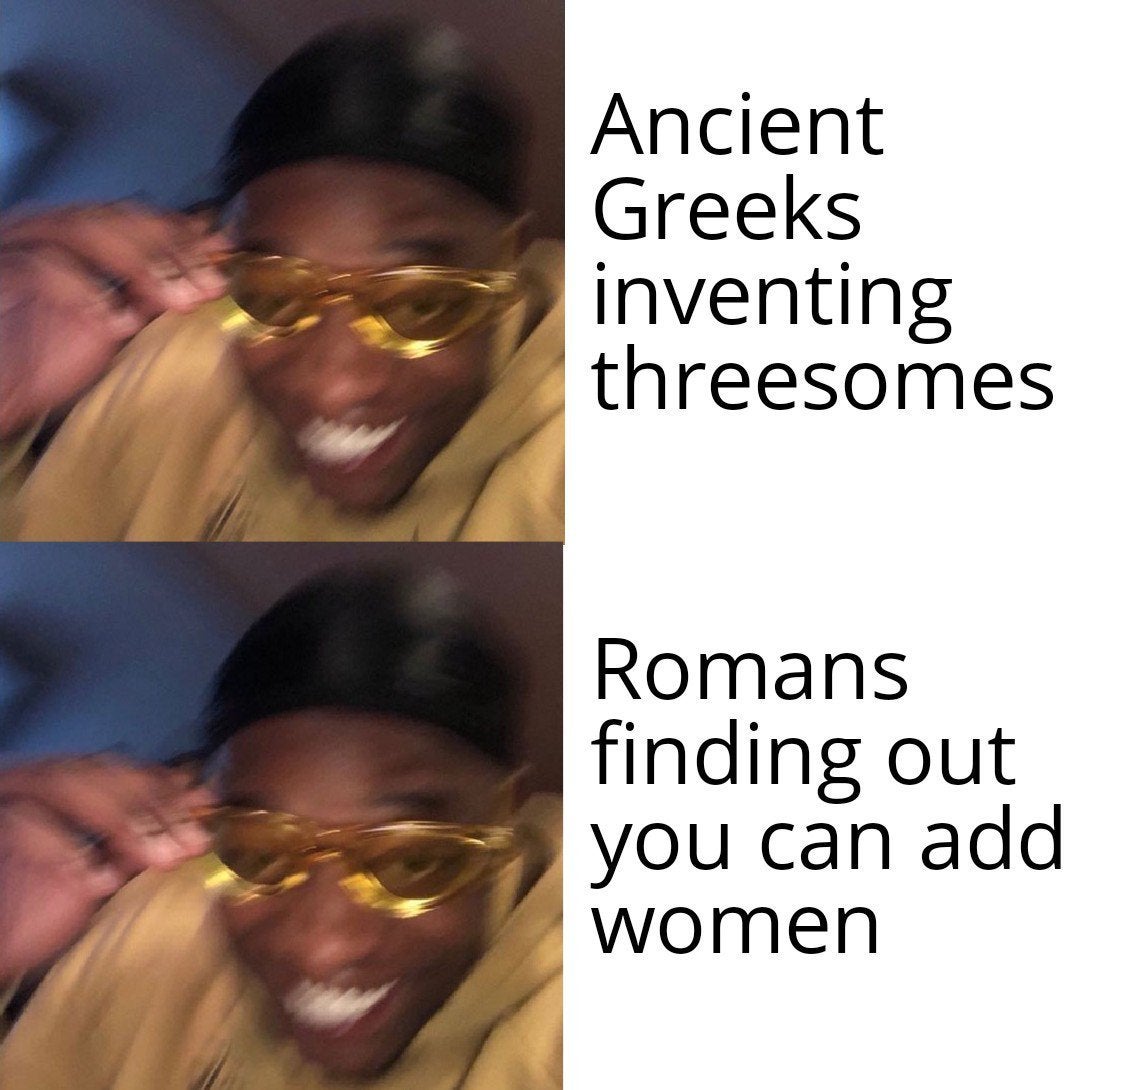 Hold up, Greeks, WAMEN, Romans, Mycenaean Greece, LwsIHG Dank Memes Hold up, Greeks, WAMEN, Romans, Mycenaean Greece, LwsIHG text: Ancient Greeks inventing threesomes Romans finding out you can add women 